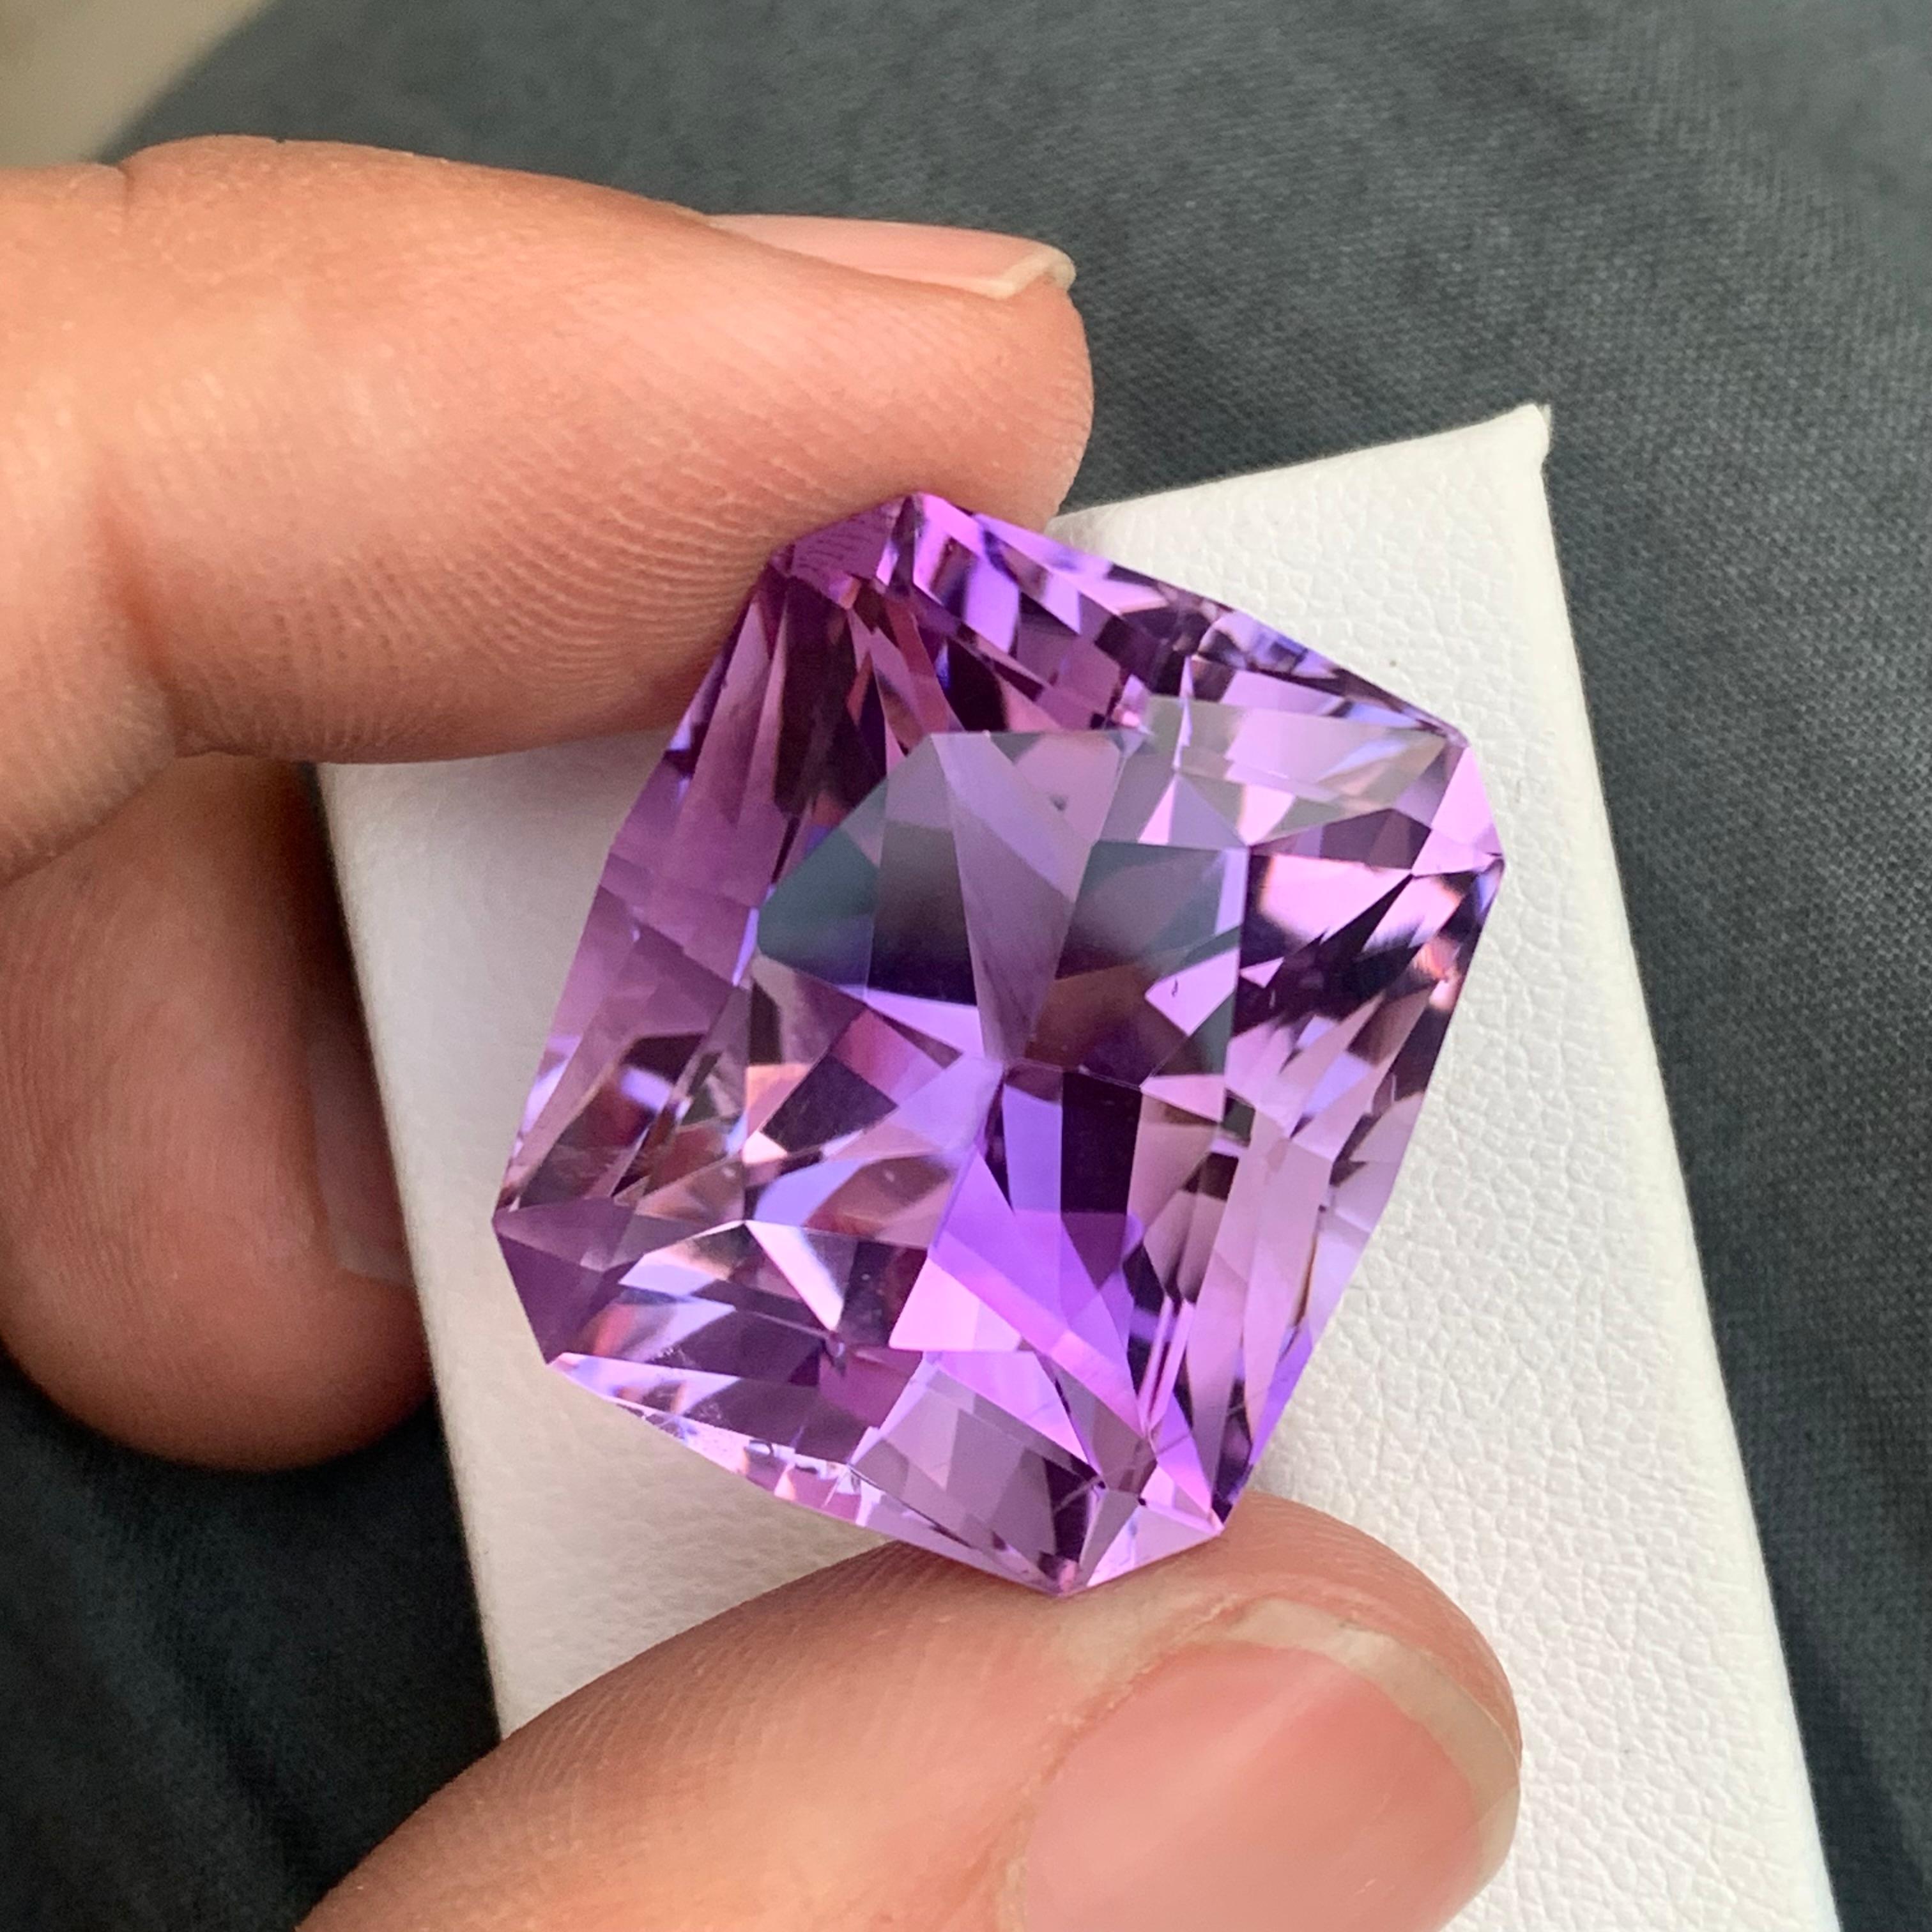 Gemstone Type : Amethyst
Weight : 50 Carats
Dimensions : 23x20.3x17.9 mm
Clarity : Eye Clean
Origin : Brazil
Color: Purple
Shape: Fancy Diamond
Certificate: On Demand
Month: February
Purported amethyst powers for healing
enhancing the immune